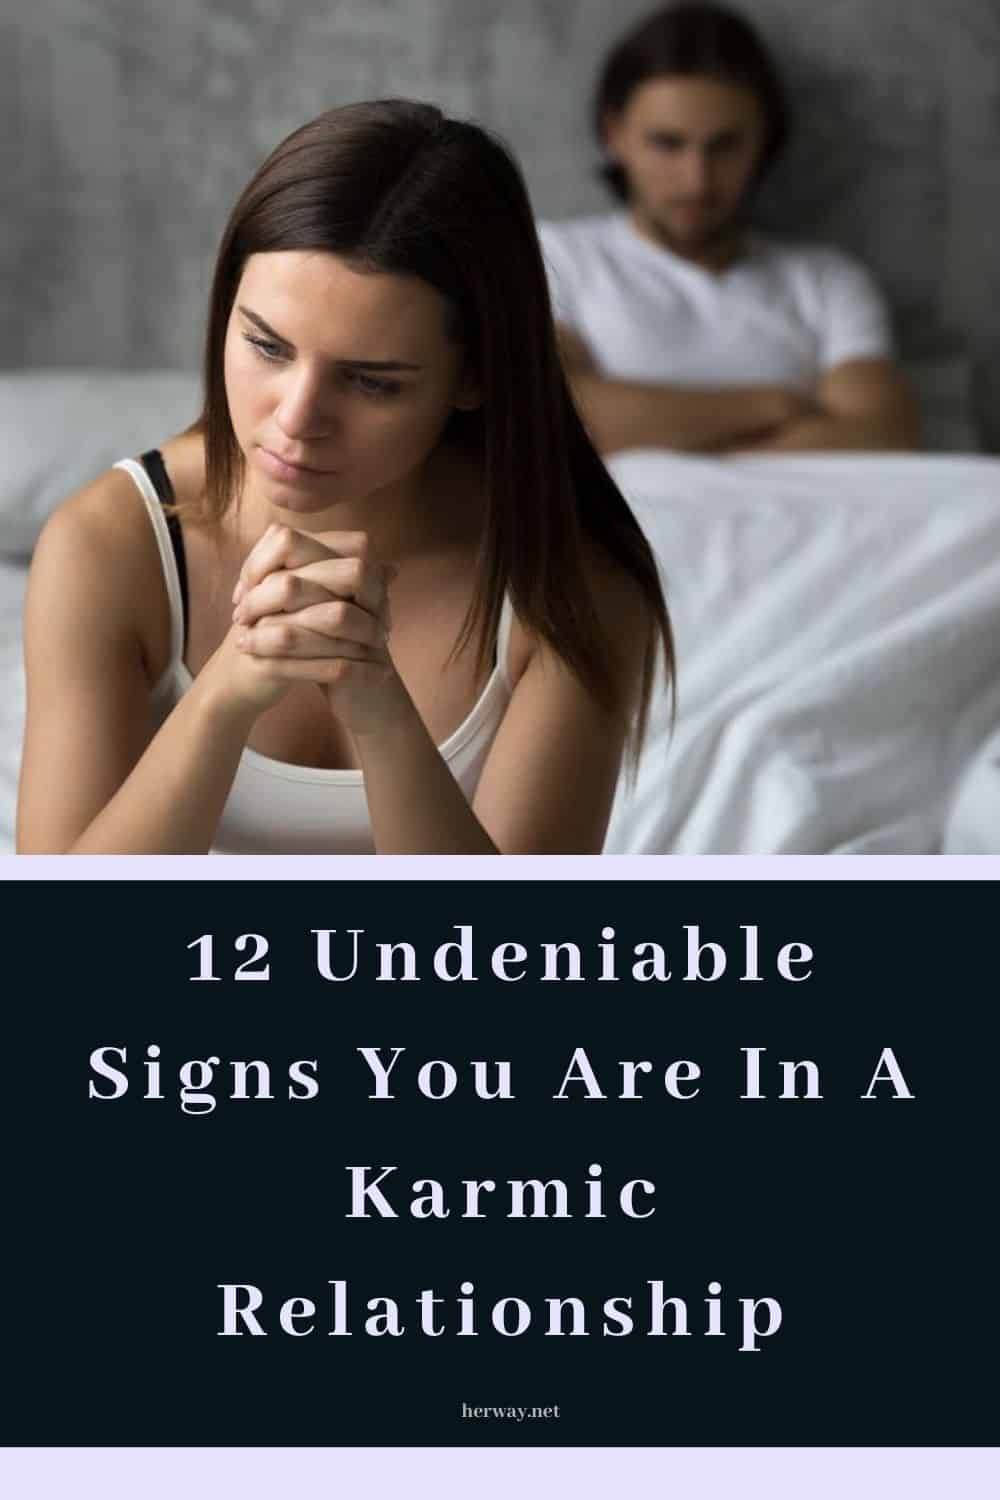 12 Undeniable Signs You Are In A Karmic Relationship